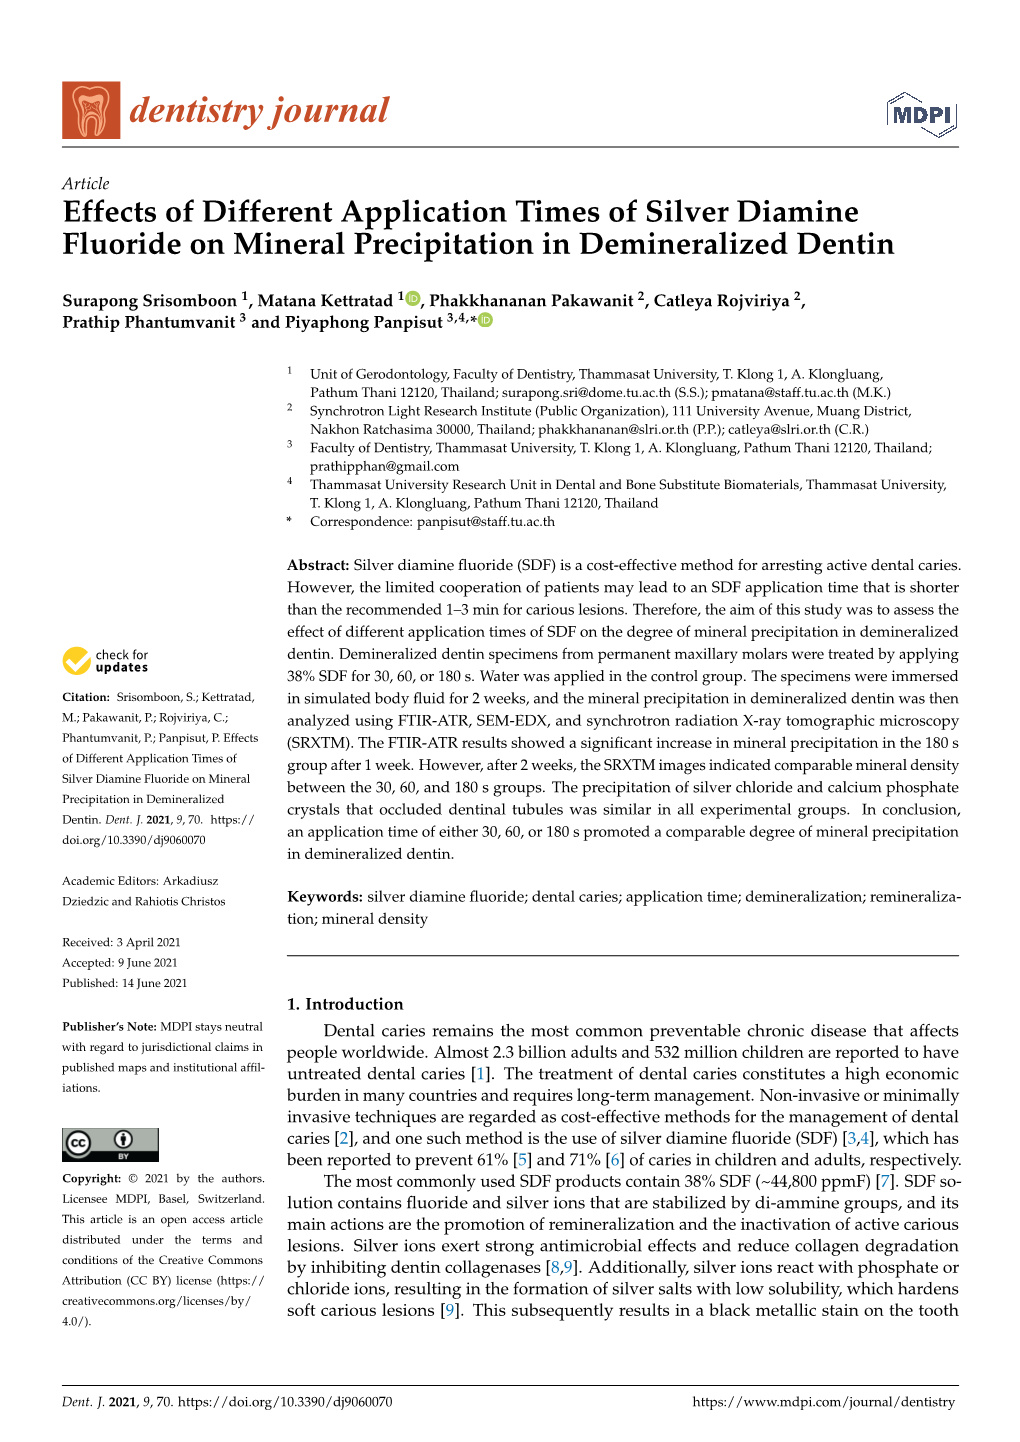 Effects of Different Application Times of Silver Diamine Fluoride on Mineral Precipitation in Demineralized Dentin